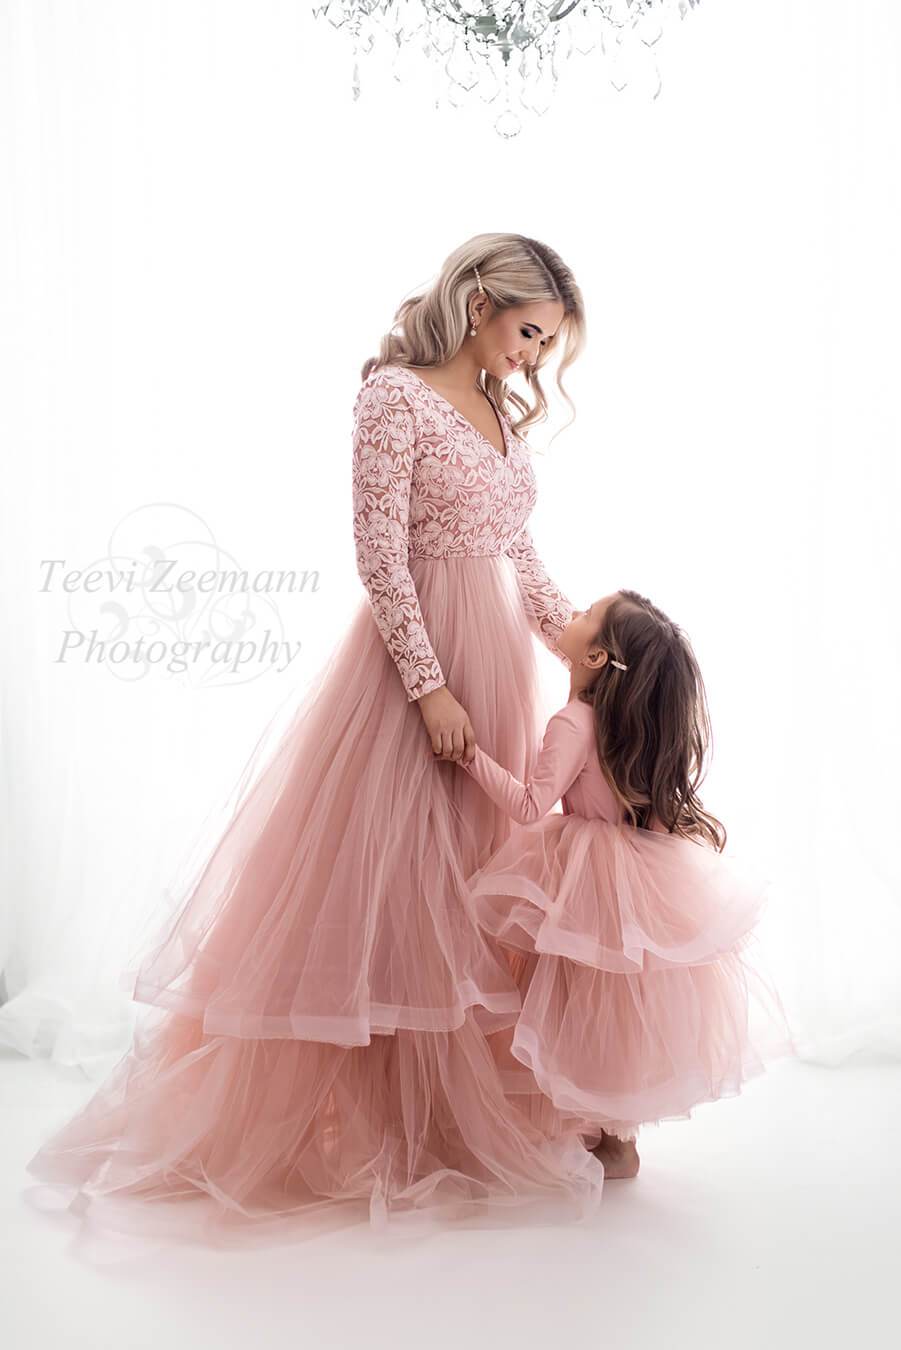 A mother is wearing a pink dress with a lace top and a tulle skirt. The little girl is looking at her mother and is wearing a dress with a big tulle skirt